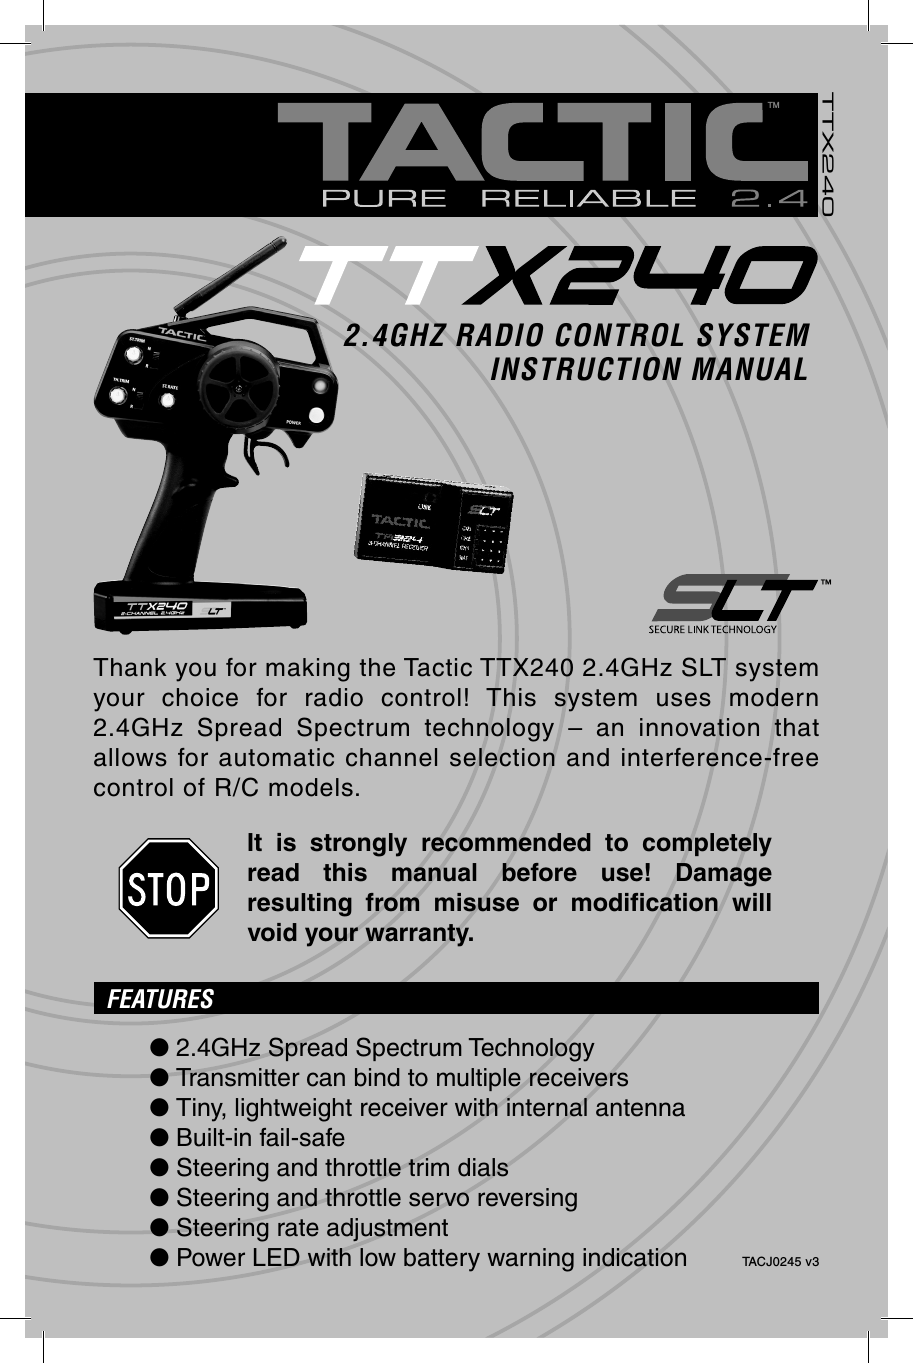 TTX240TM™2.4GHZ RADIO CONTROL SYSTEMINSTRUCTION MANUALTACJ0245 v3Thank you for making the Tactic TTX240 2.4GHz SLT system your choice for radio control! This system uses modern 2.4GHz Spread Spectrum technology – an innovation that allows for automatic channel selection and interference-free control of R/C models.It is strongly recommended to completely read this manual before use! Damage resulting from misuse or modiﬁ cation  will void your warranty.FEATURES● 2.4GHz Spread Spectrum Technology● Transmitter can bind to multiple receivers● Tiny, lightweight receiver with internal antenna● Built-in fail-safe● Steering and throttle trim dials● Steering and throttle servo reversing● Steering rate adjustment● Power LED with low battery warning indication